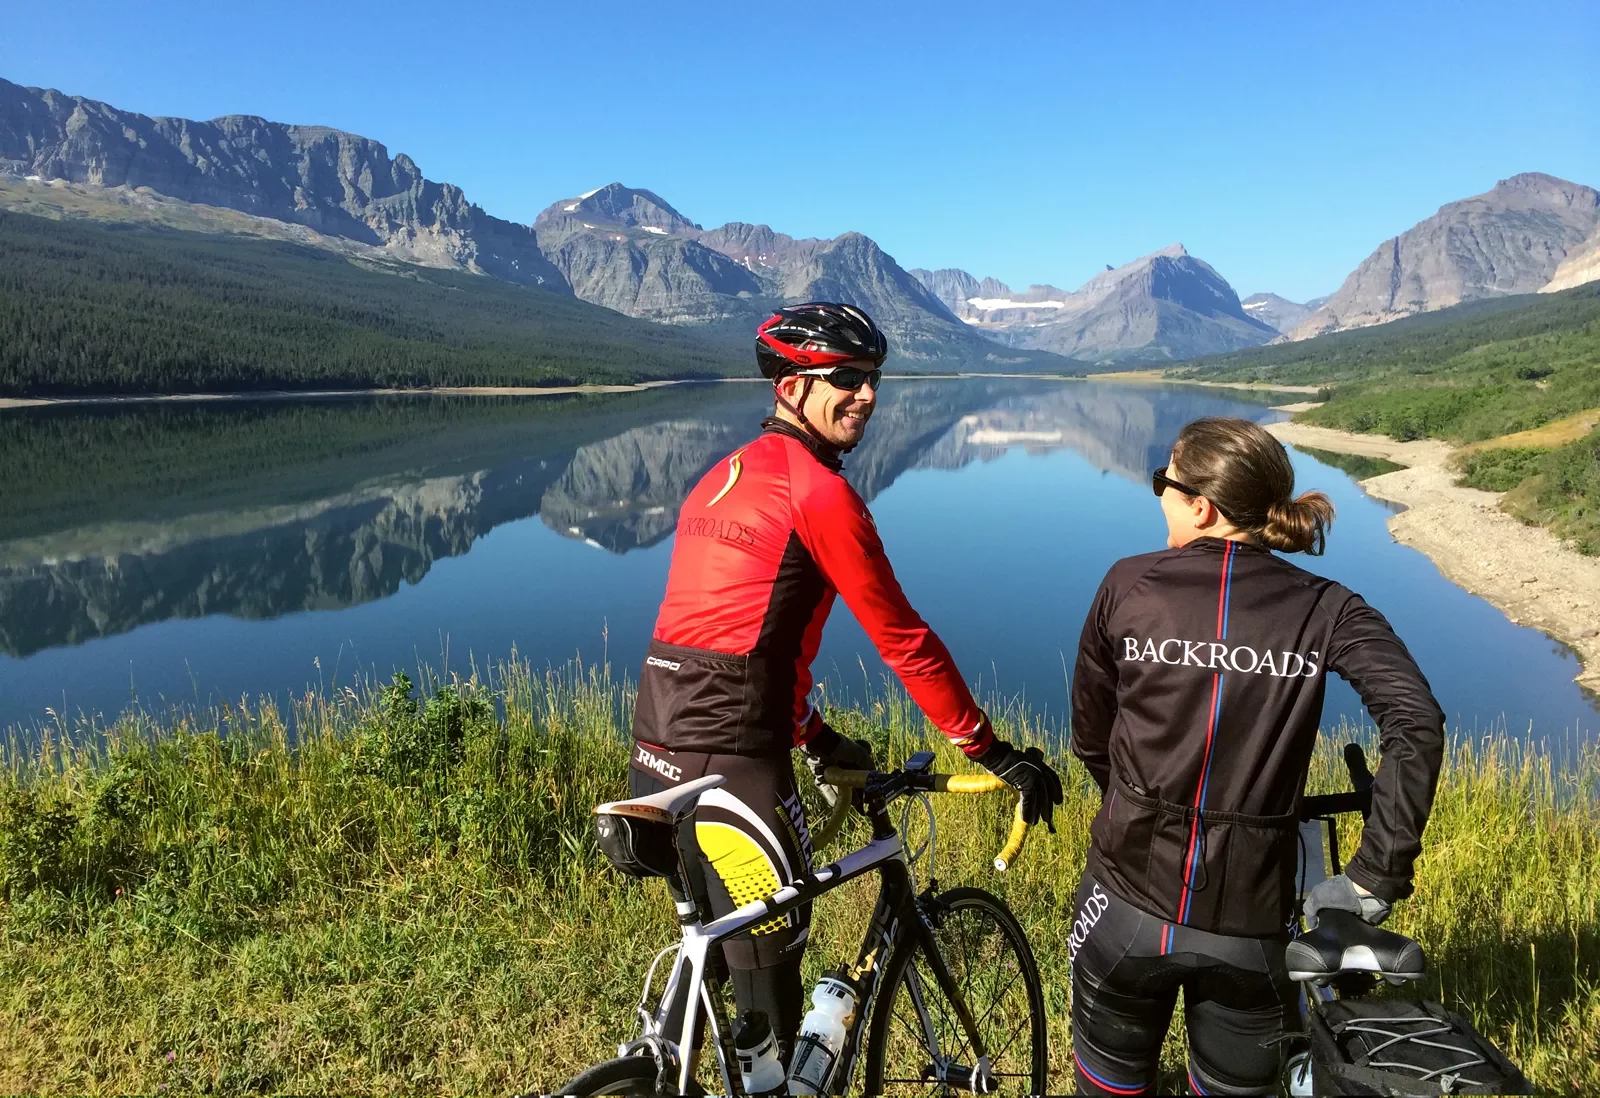 Two bikers resting and chatting with mountains and a clear lake in the background